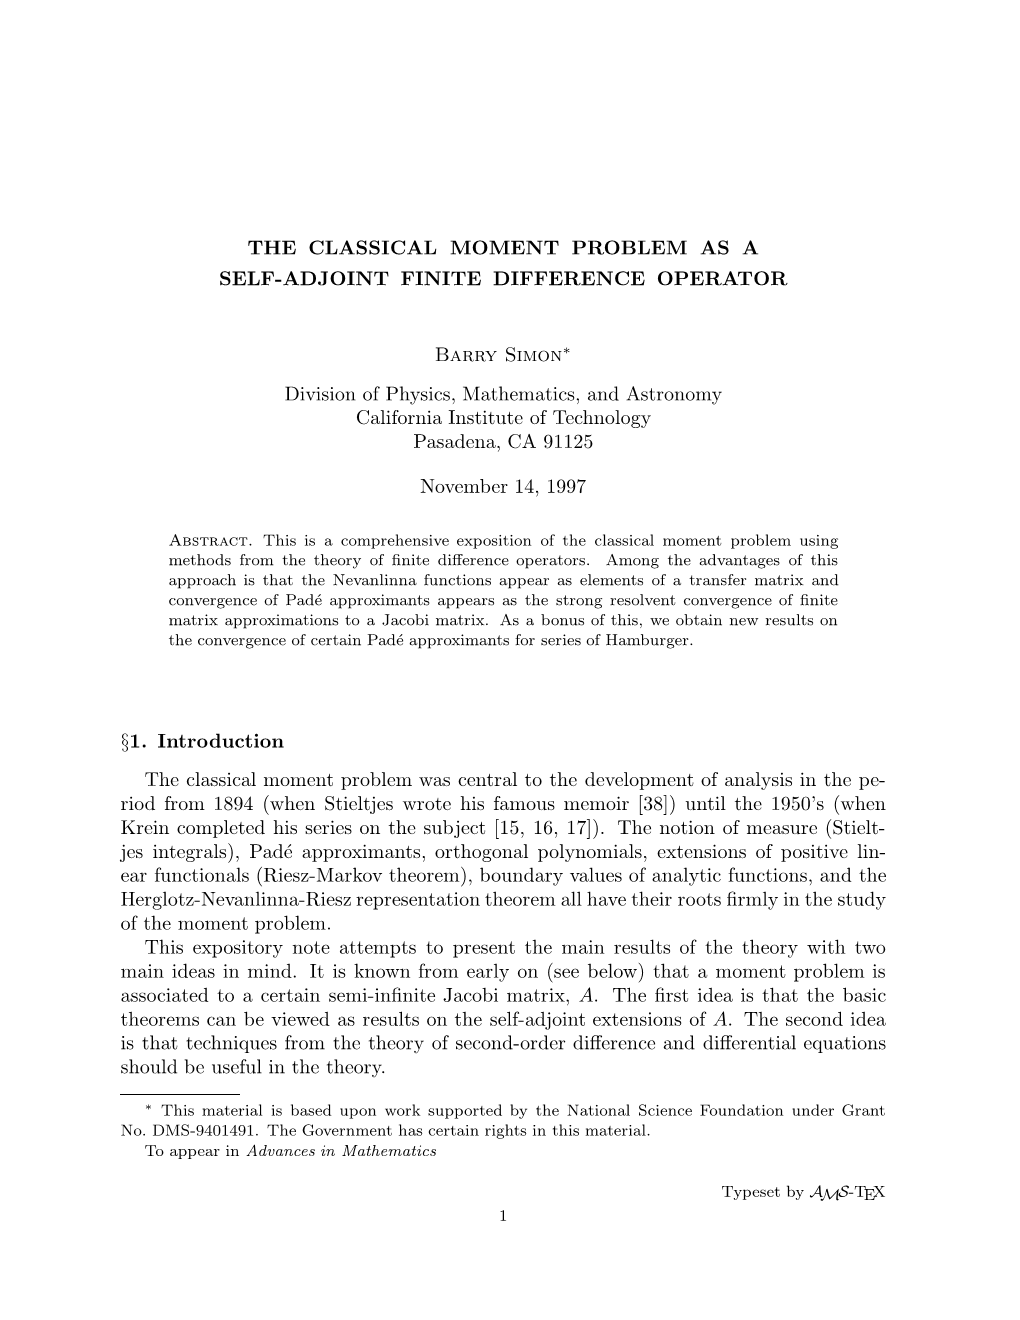 The Classical Moment Problem As a Self-Adjoint Finite Difference Operator